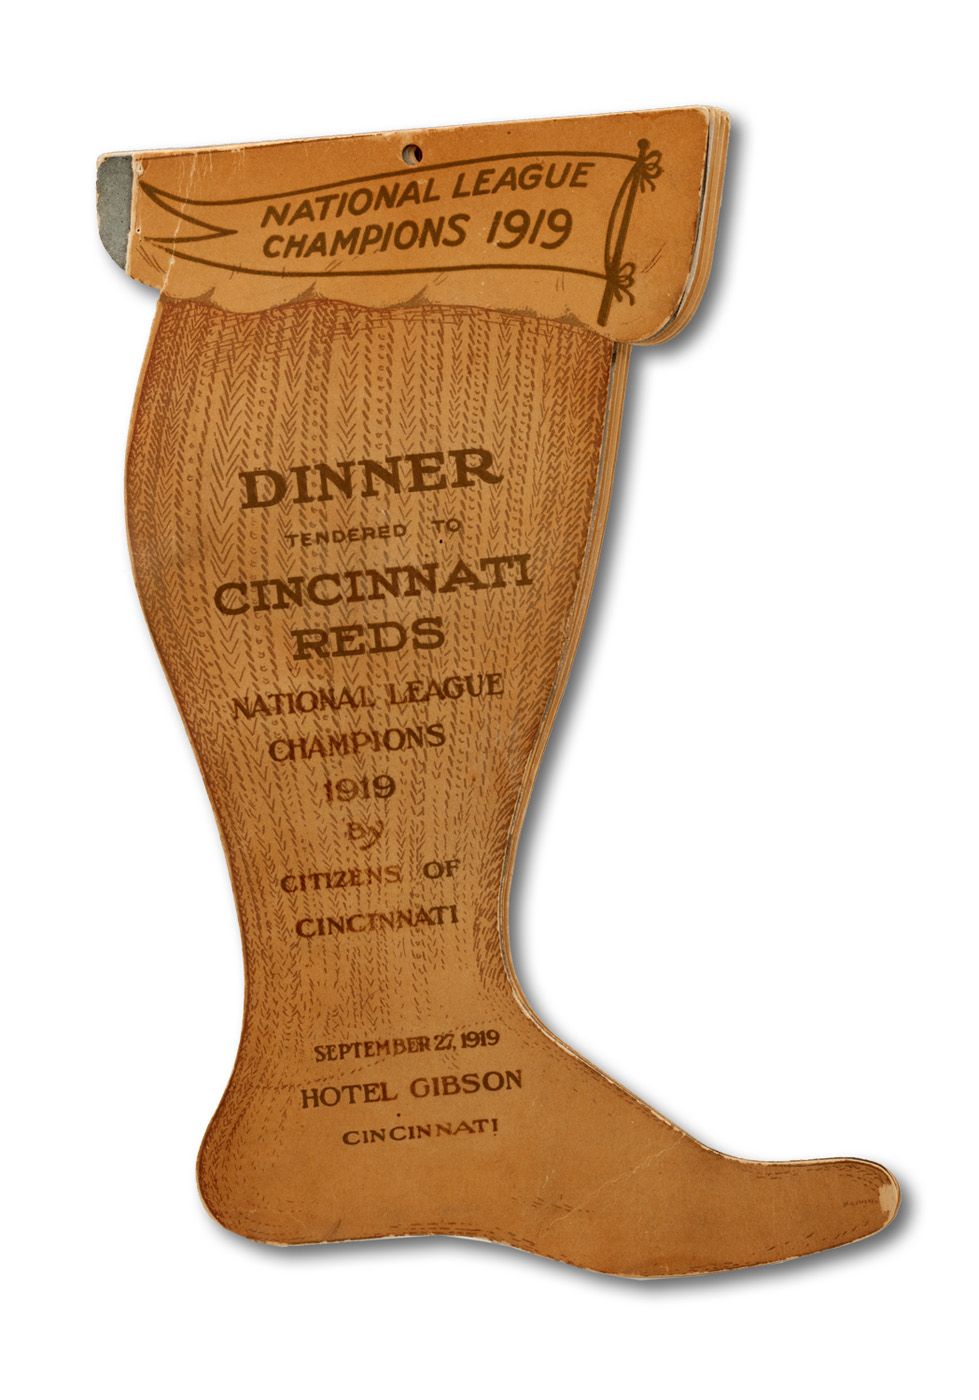 Lot Detail - 1919 CINCINNATI REDS NATIONAL LEAGUE CHAMPIONS DIE-CUT BANQUET  PROGRAM SIGNED BY CAL MCVEY, GEORGE WRIGHT AND OAK TAYLOR - LAST LIVING  SURVIVORS FROM 1869 CHAMPION RED STOCKINGS (HELMS/LA84